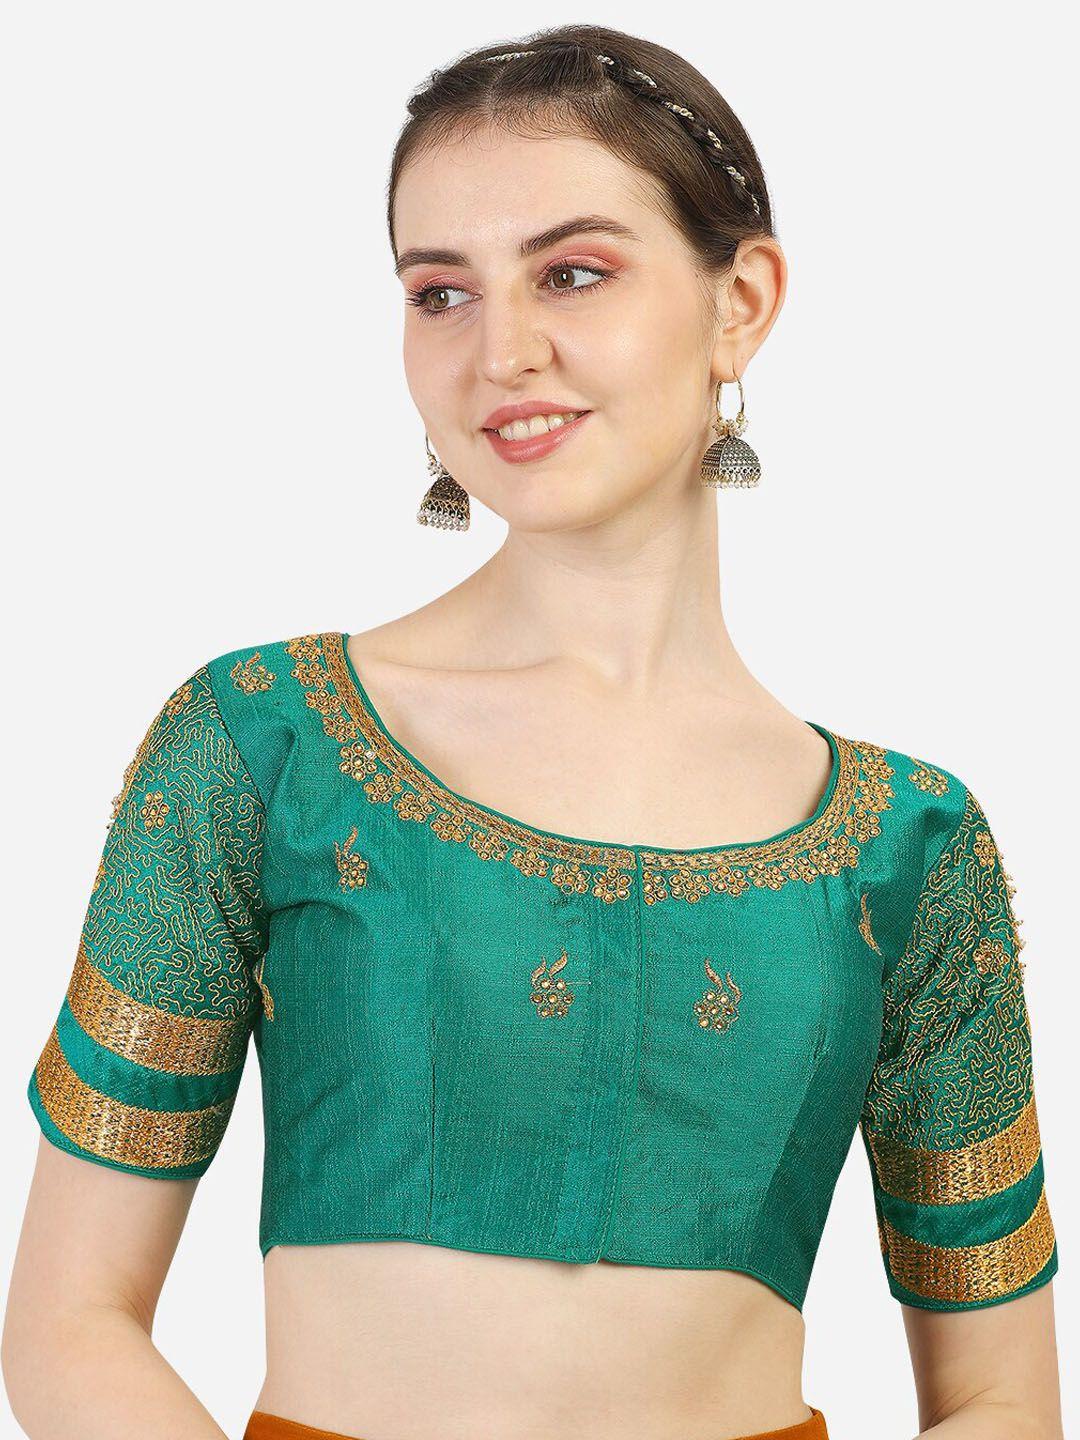 pujia mills  green & gold-toned embroidered saree blouse